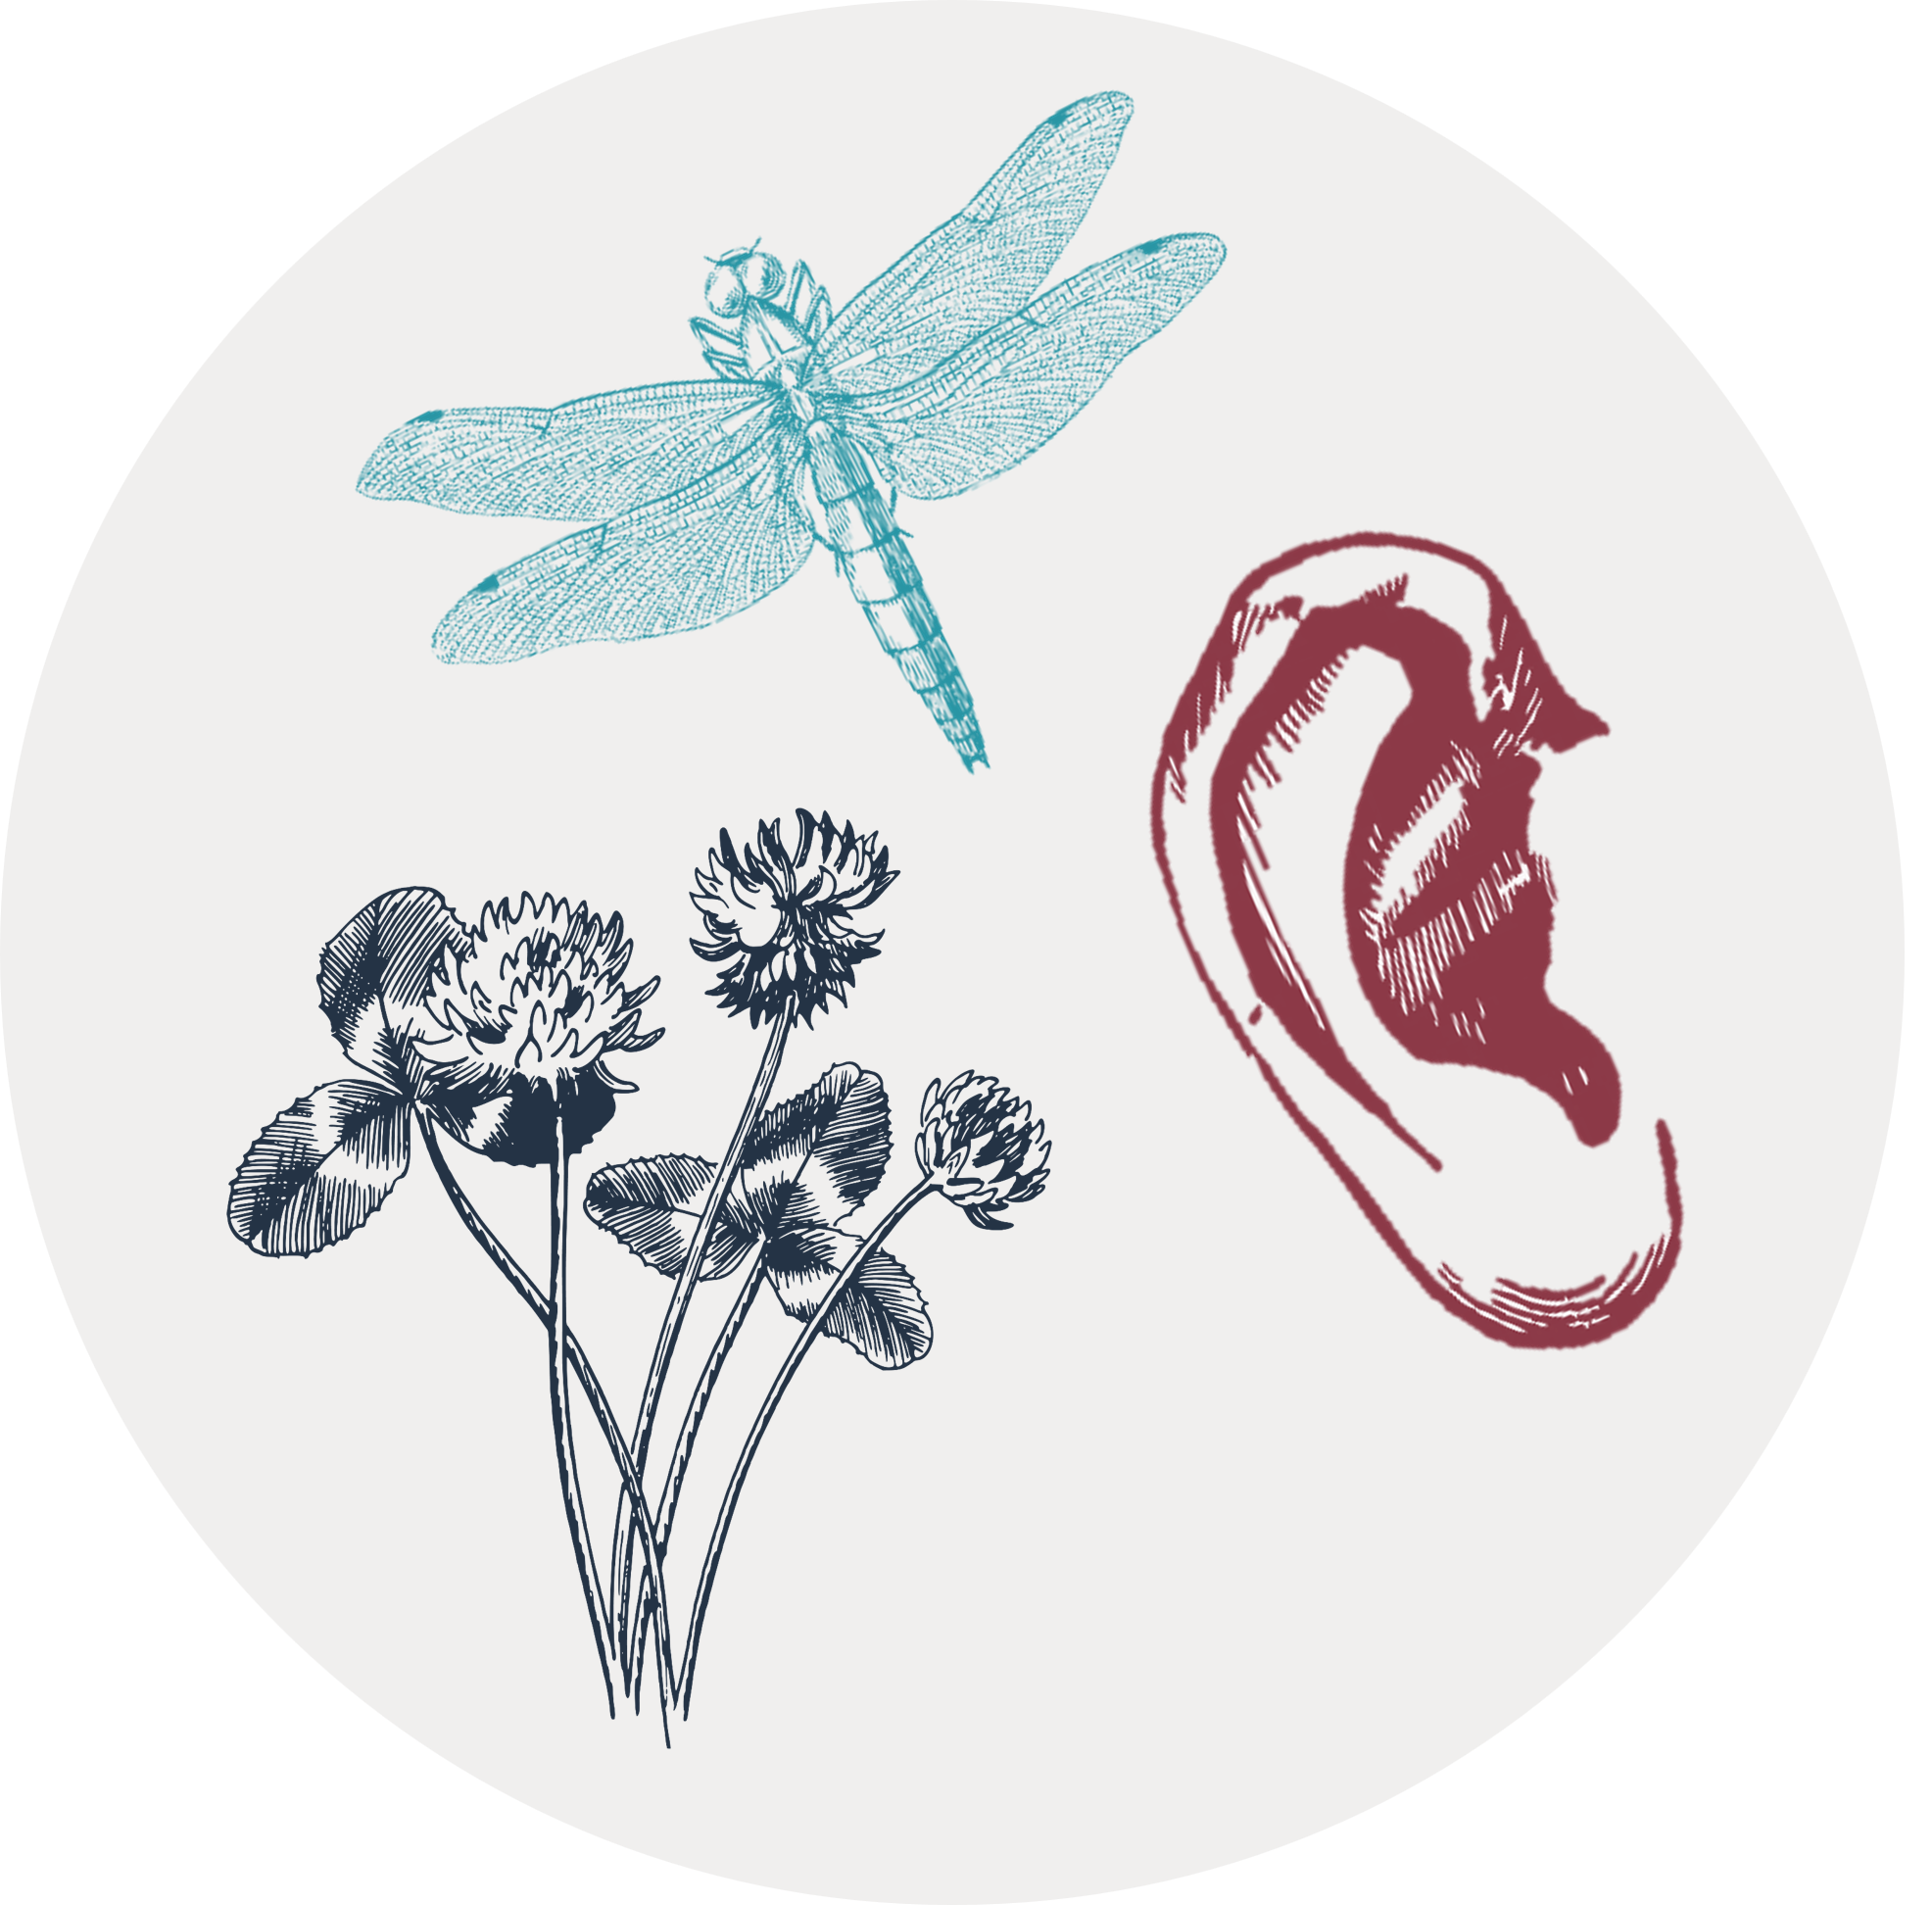 Gray circle with drawings of a clover, a dragonfly, and a listening ear